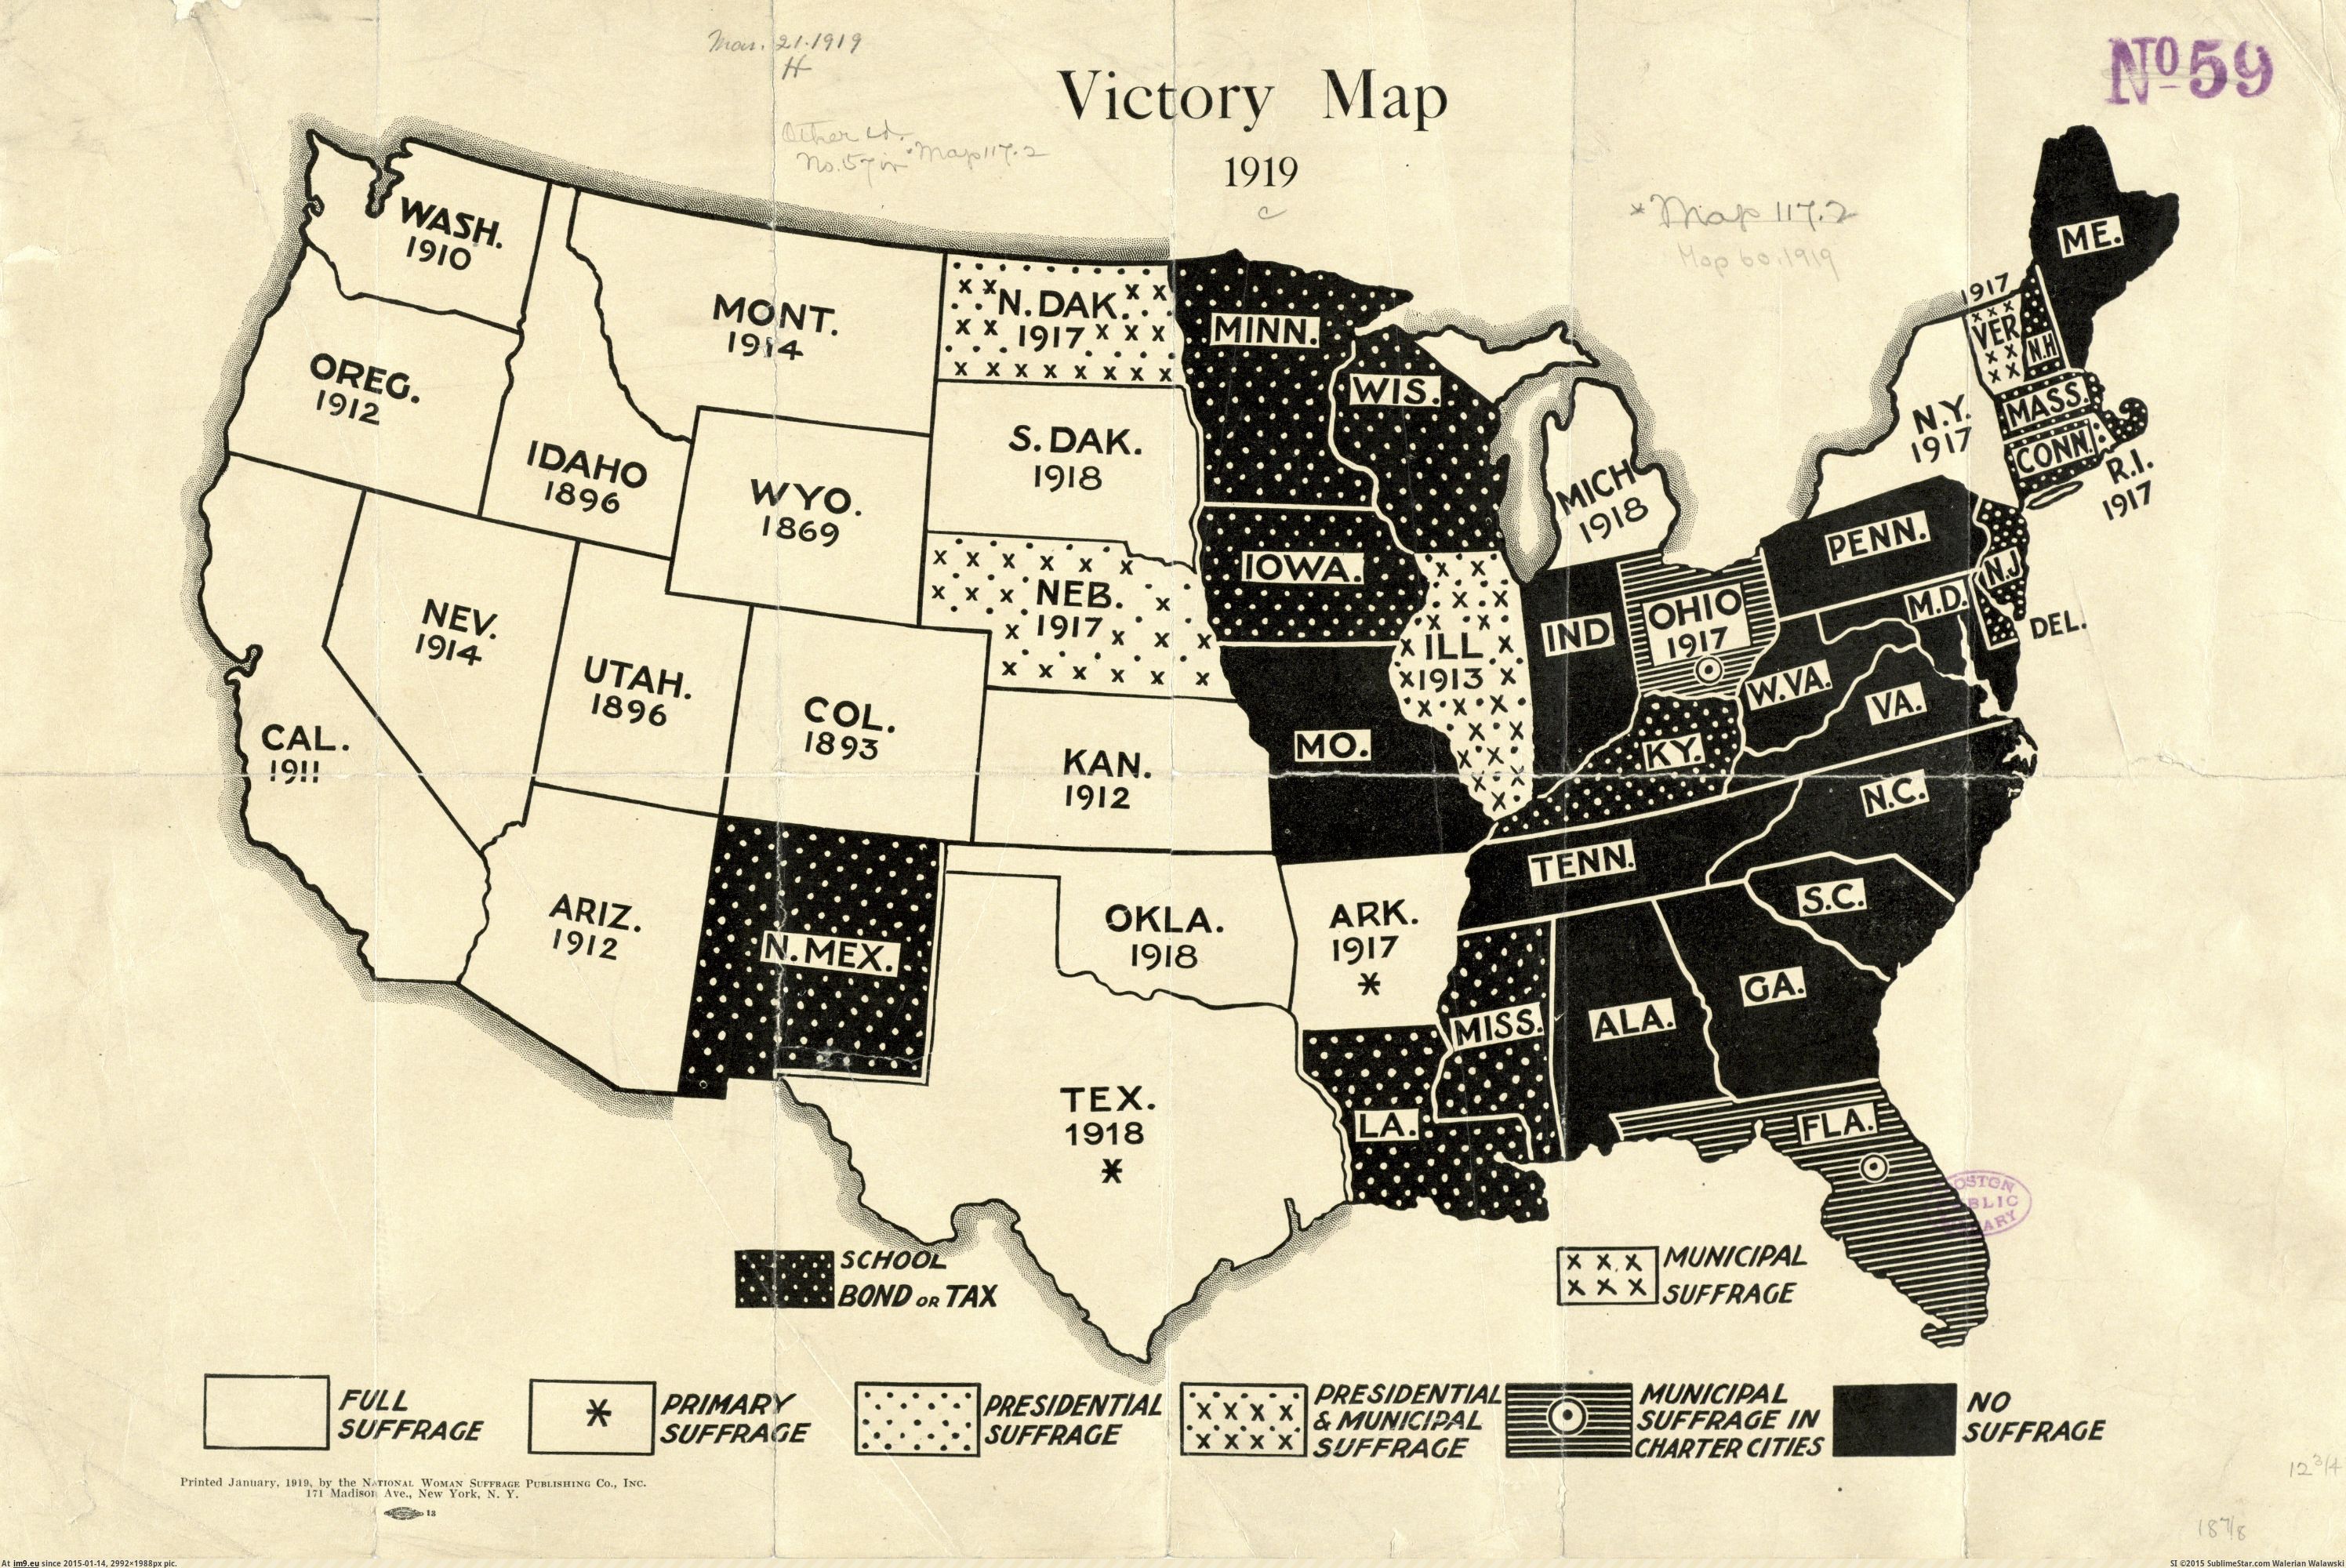 [Mapporn] Status of Women's Right to Vote in the United States, January 1919. [2992×1988] (in My r/MAPS favs)